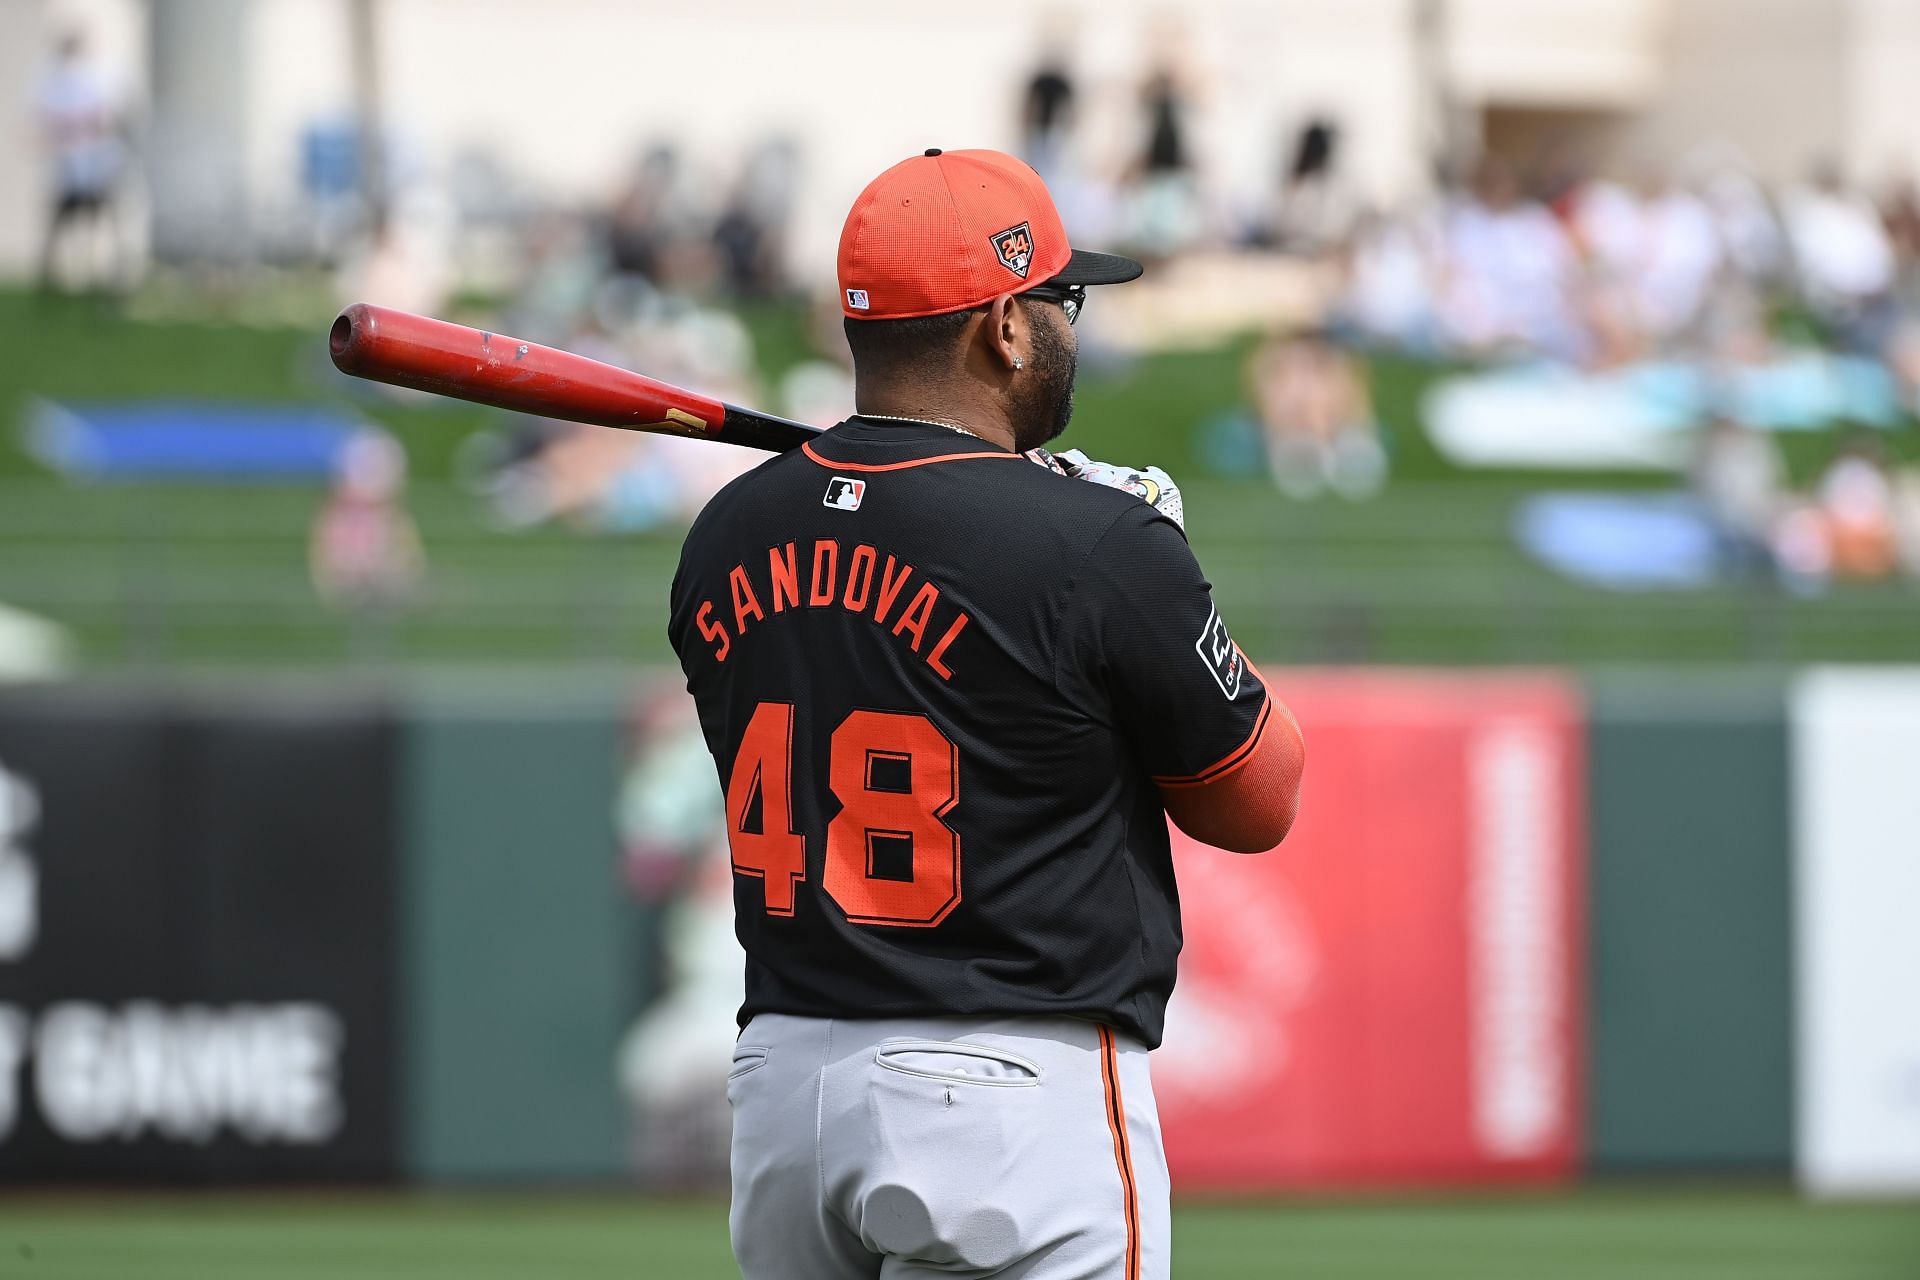 Pablo Sandoval has been abysmal at Spring Training